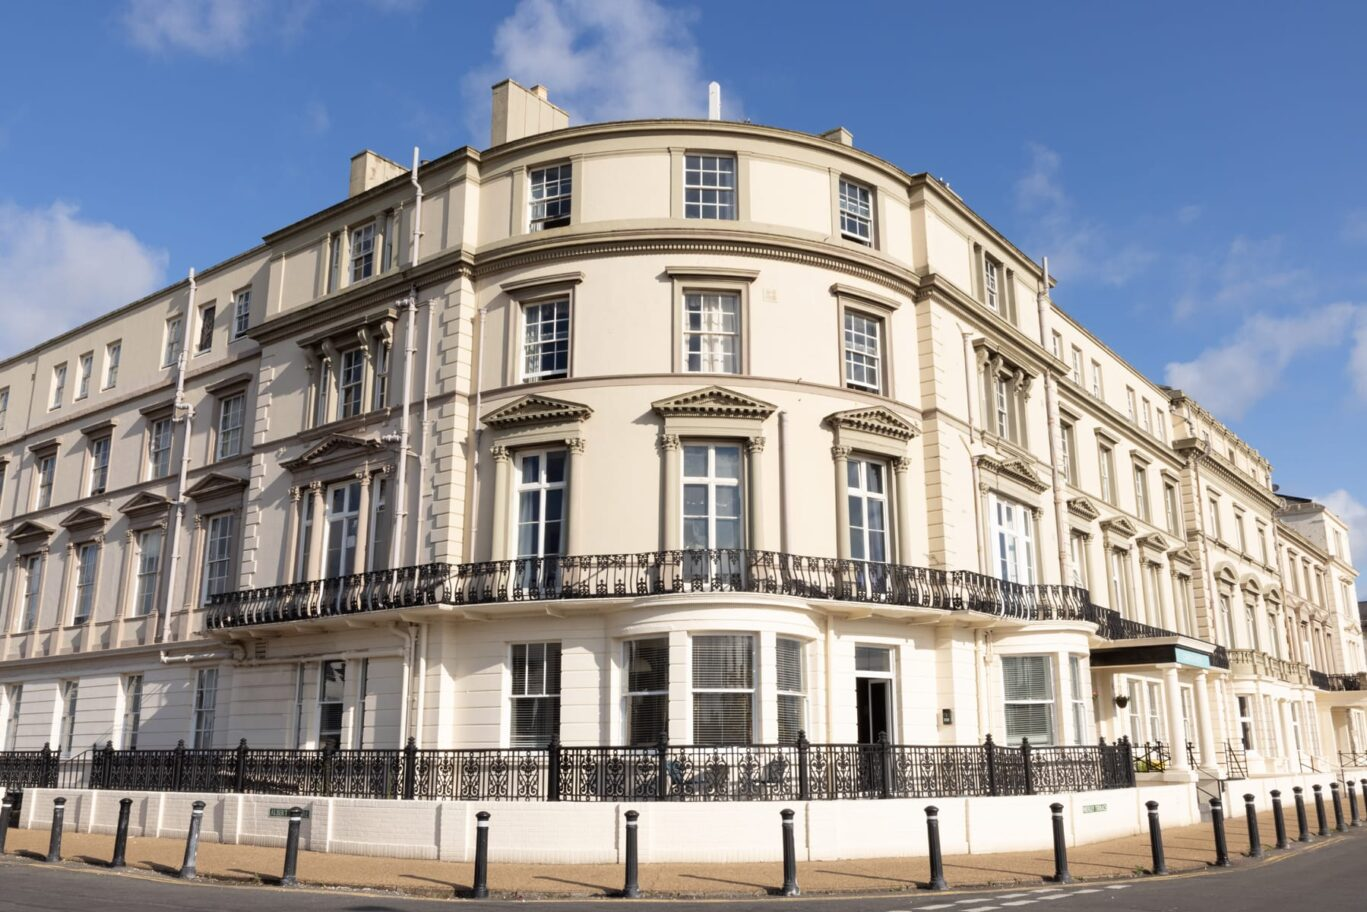 Many people over the years visiting Yarmouth have stayed at the Carlton hotel. It's known as a historic landmark and goes back hundreds of years. The location is prime Great Yarmouth and a stone throw away from the beach